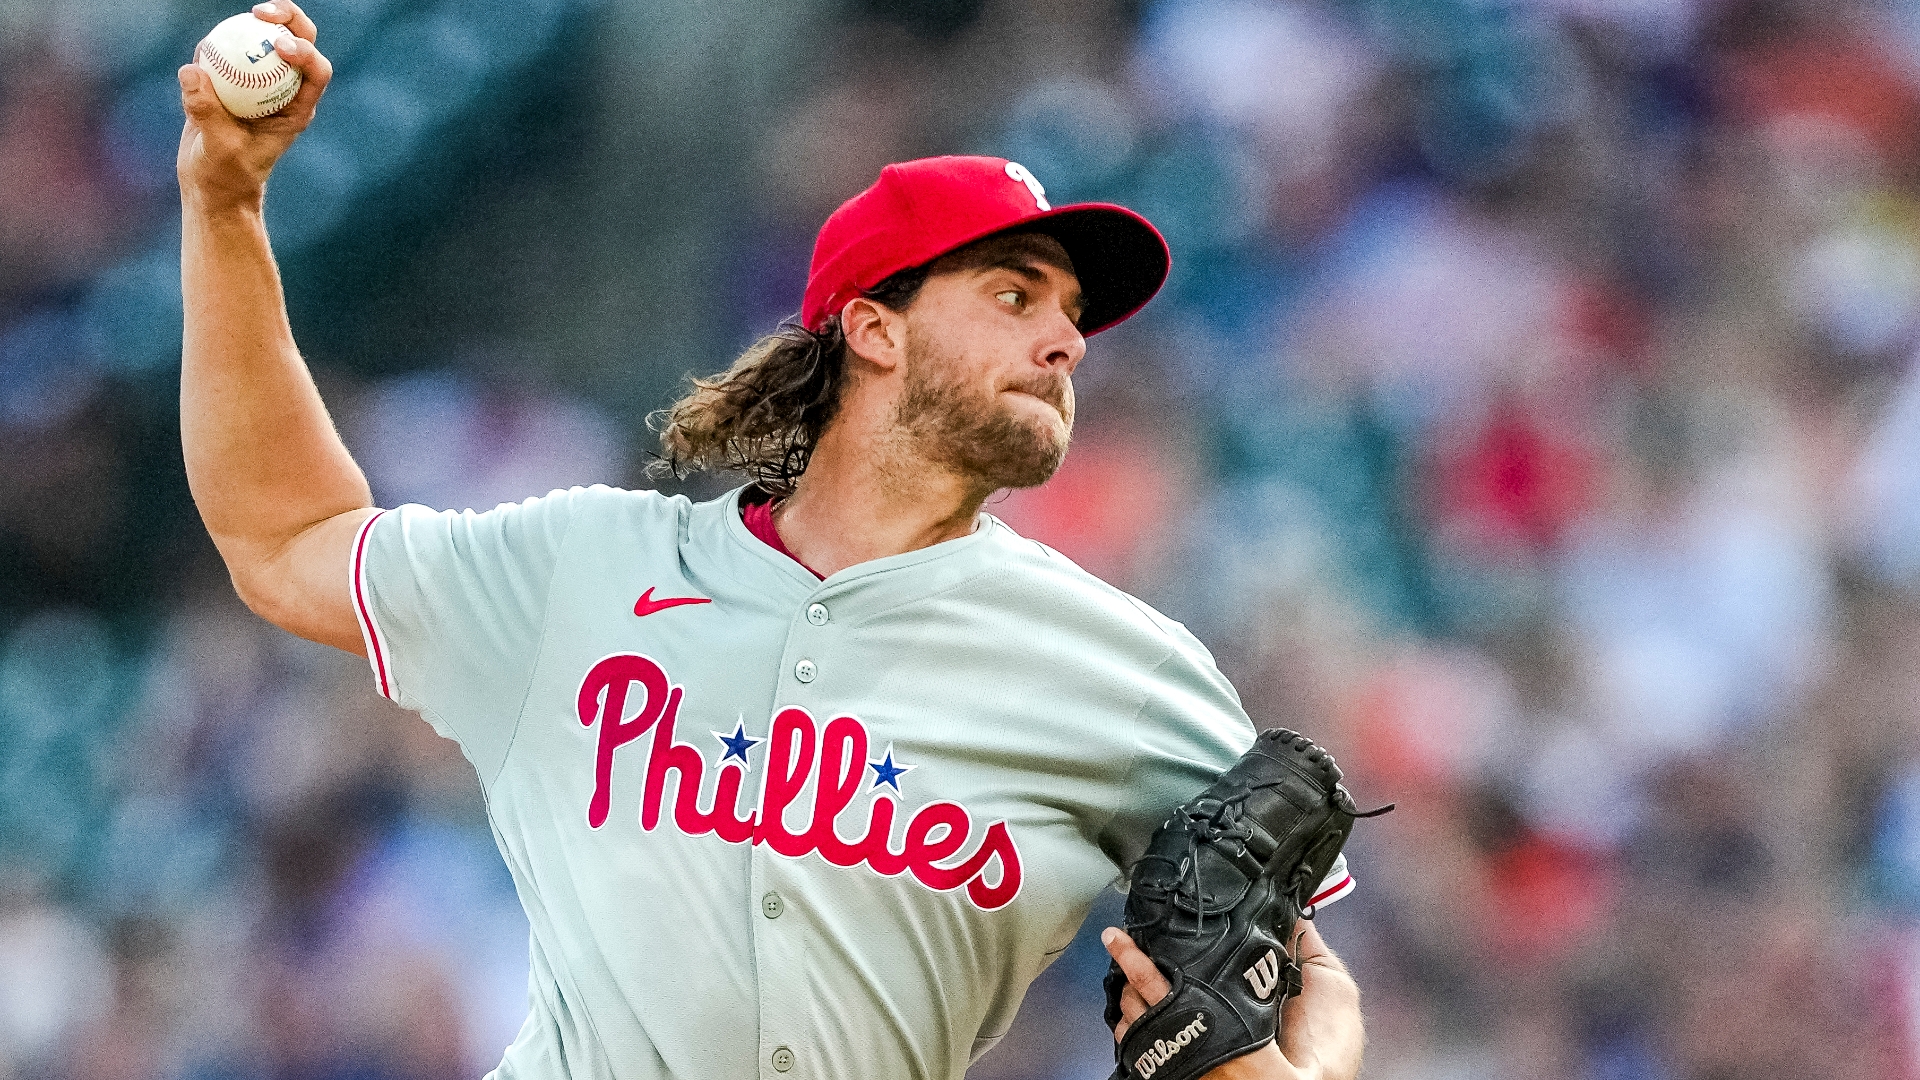 Phillies record first 1-3-5 triple play since 1929